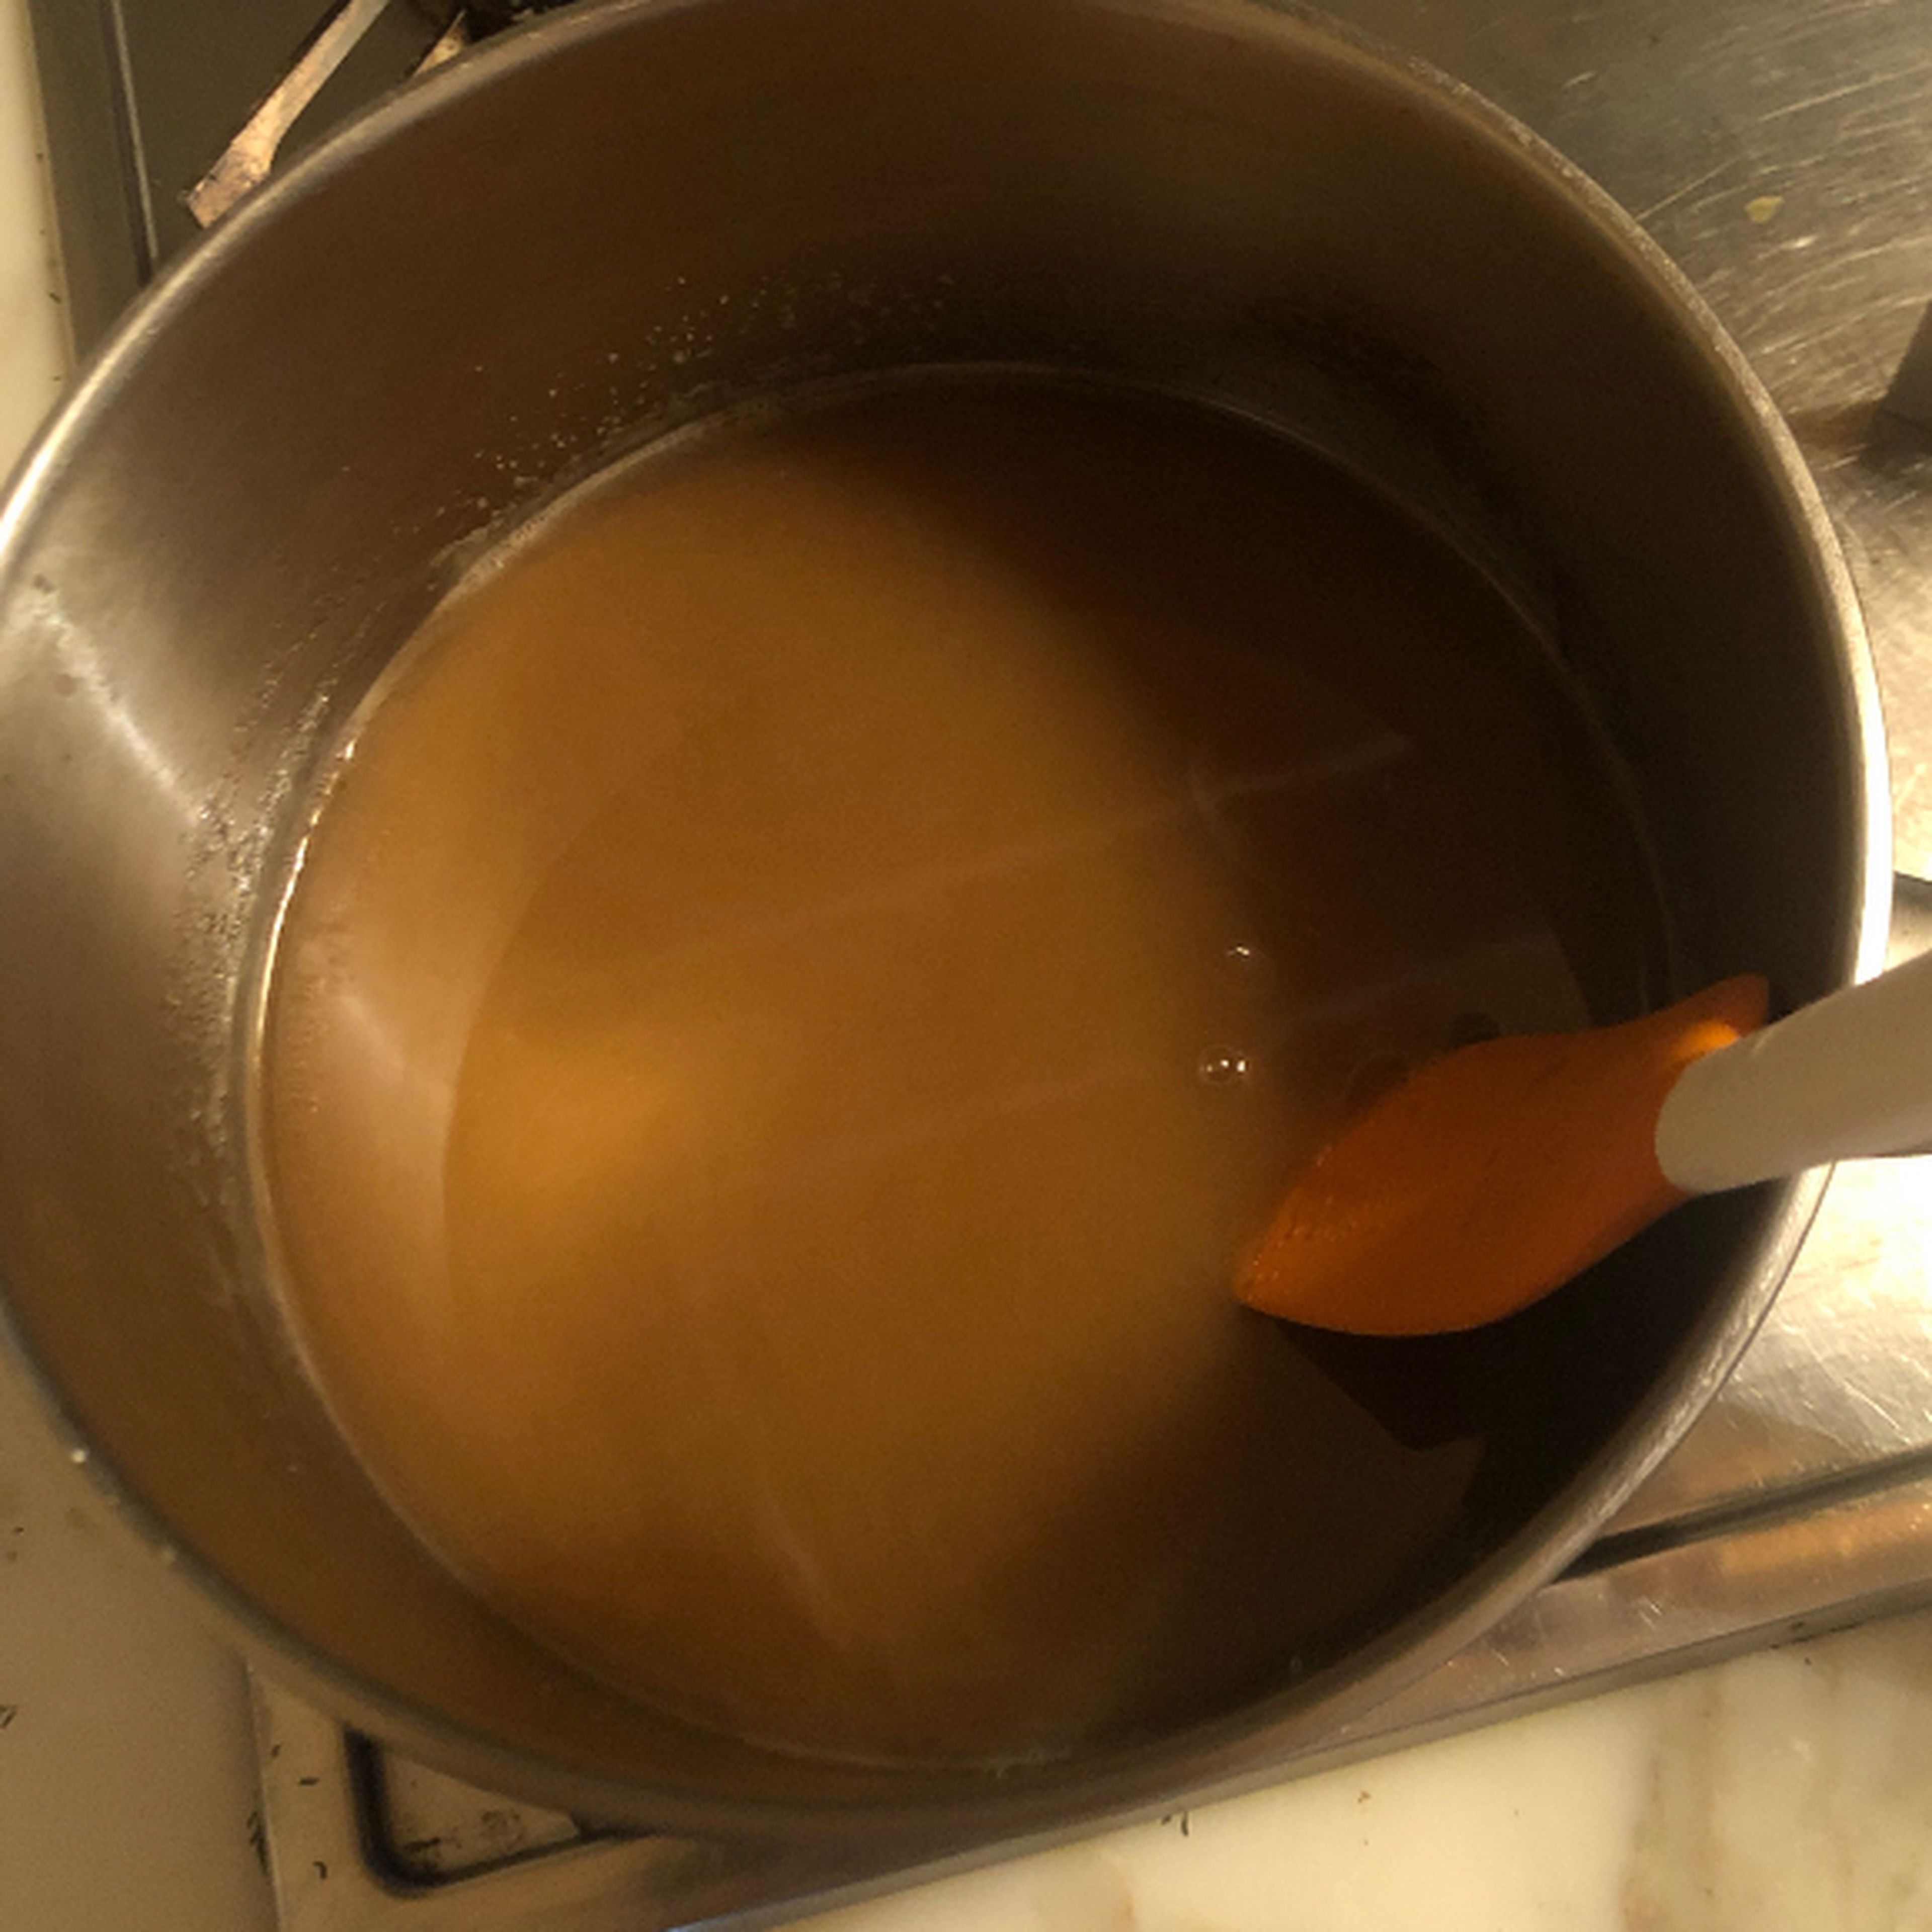 In a pan, heat the water and sugar until you get a caramel colouring.